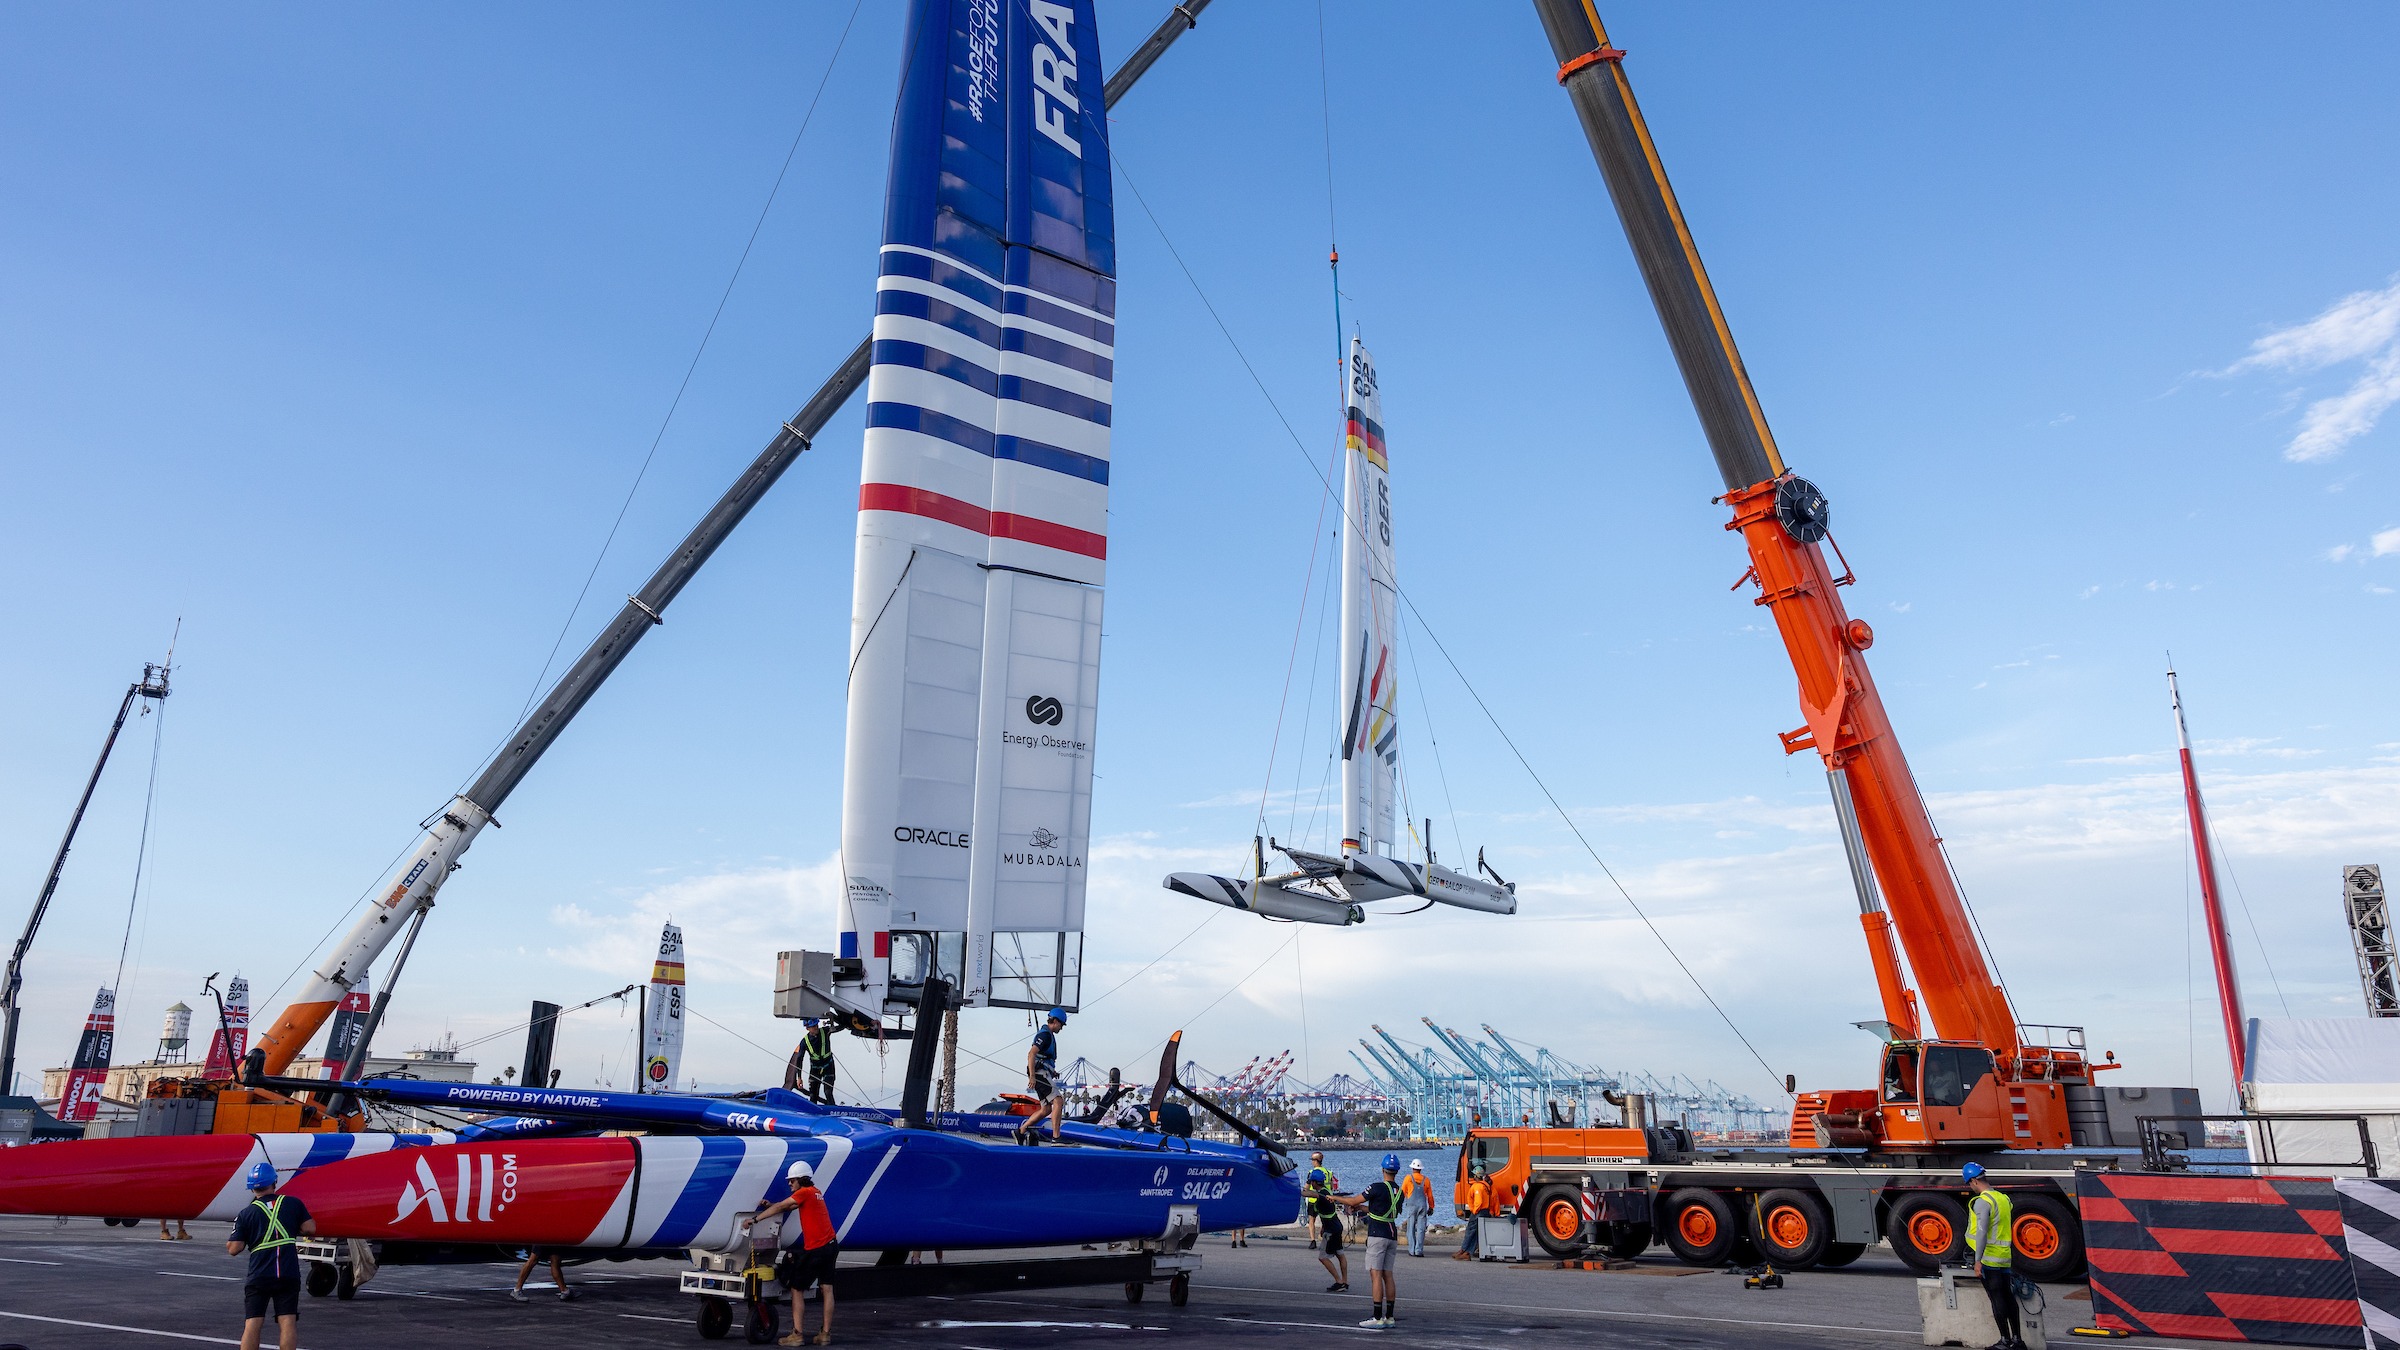 Season 4 // Los Angeles Sail Grand Prix // German and French F50s craned in